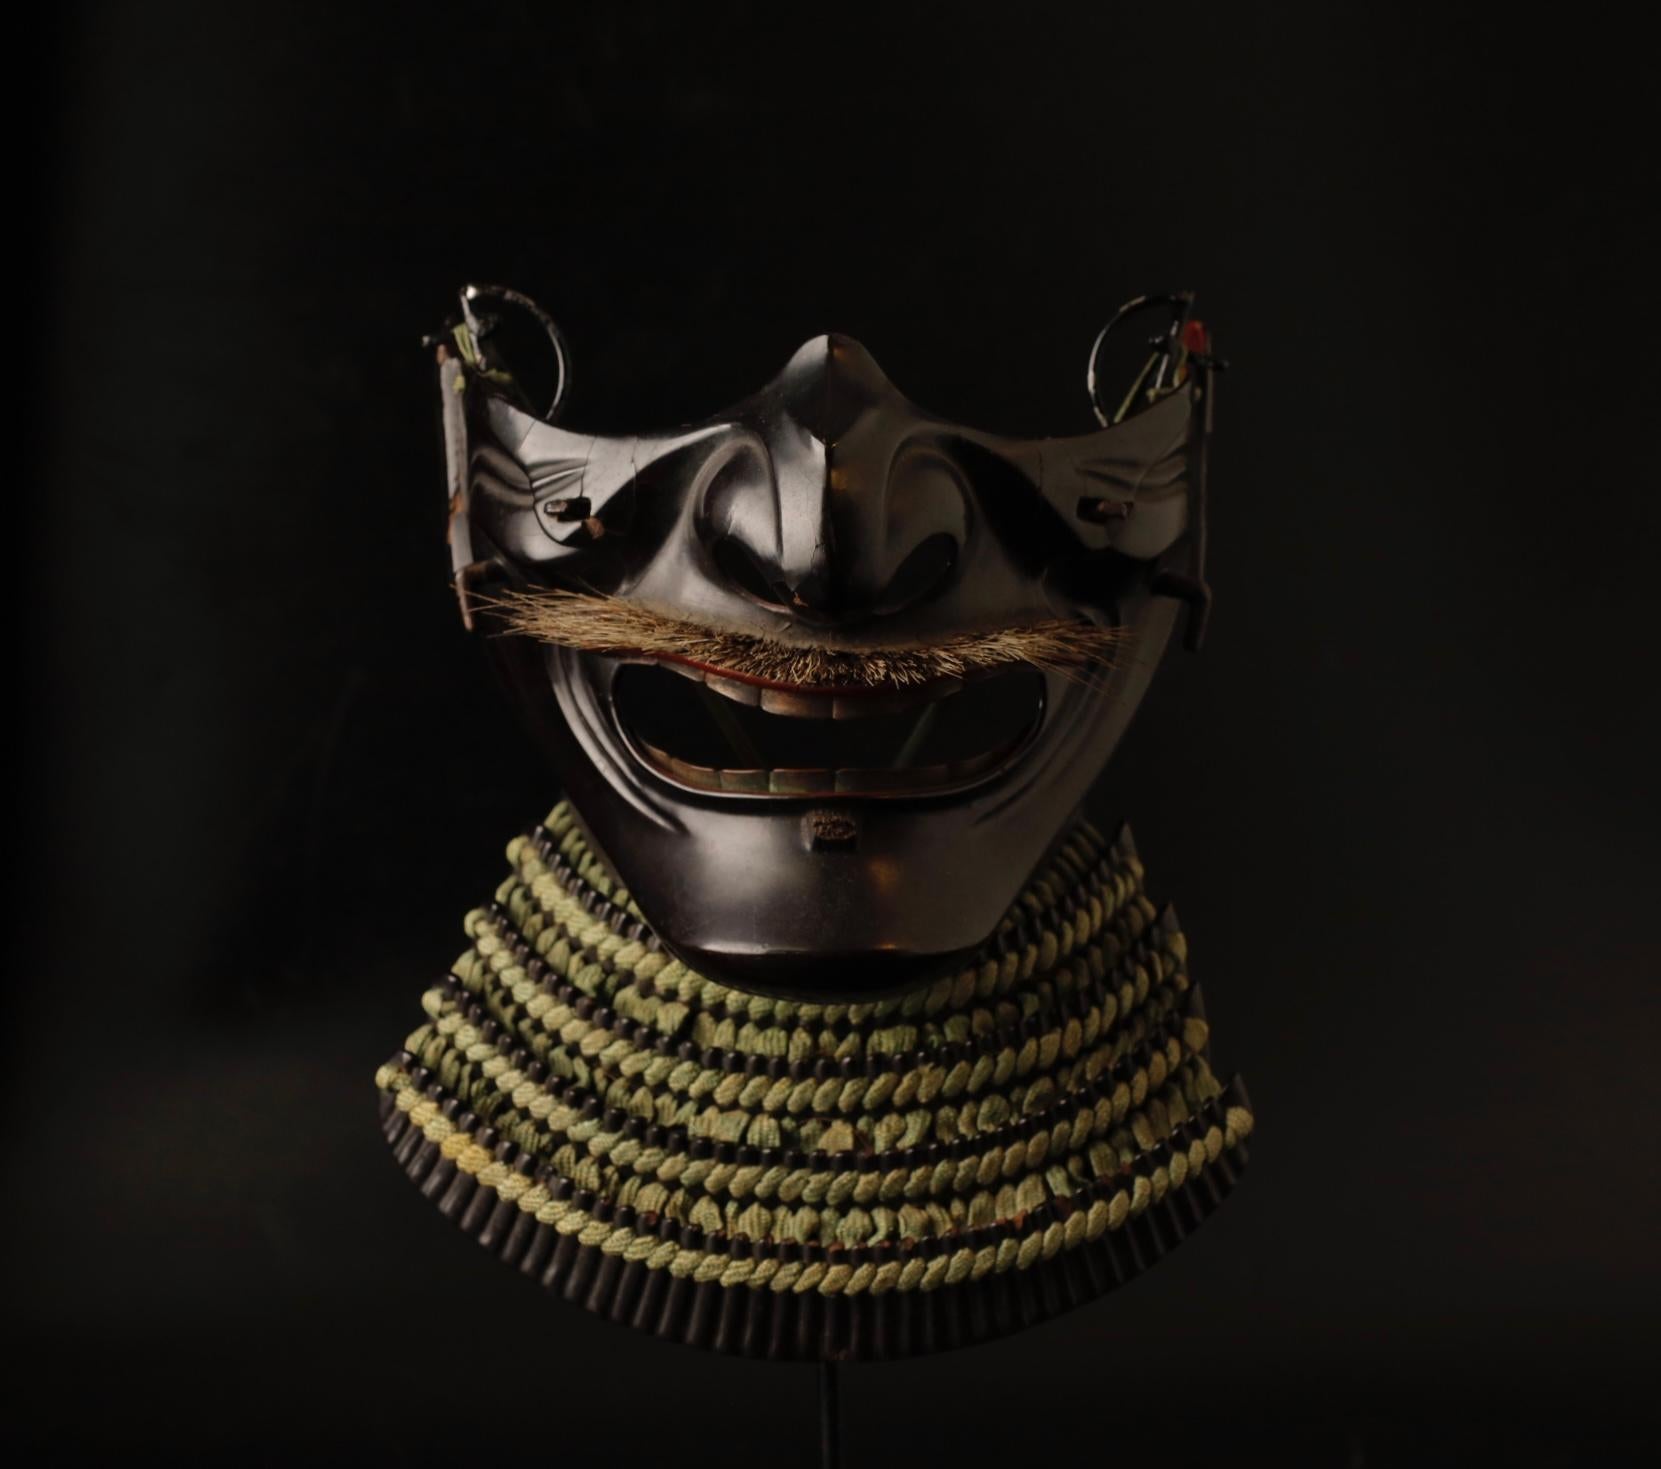 The Ressei Menpo is a striking and fearsome type of Menpo, a face guard that was an integral part of the Samurai armor during the period of the Samurai (1185-1868). Crafted by skilled artisans, the Ressei Menpo is designed to evoke a sense of fury